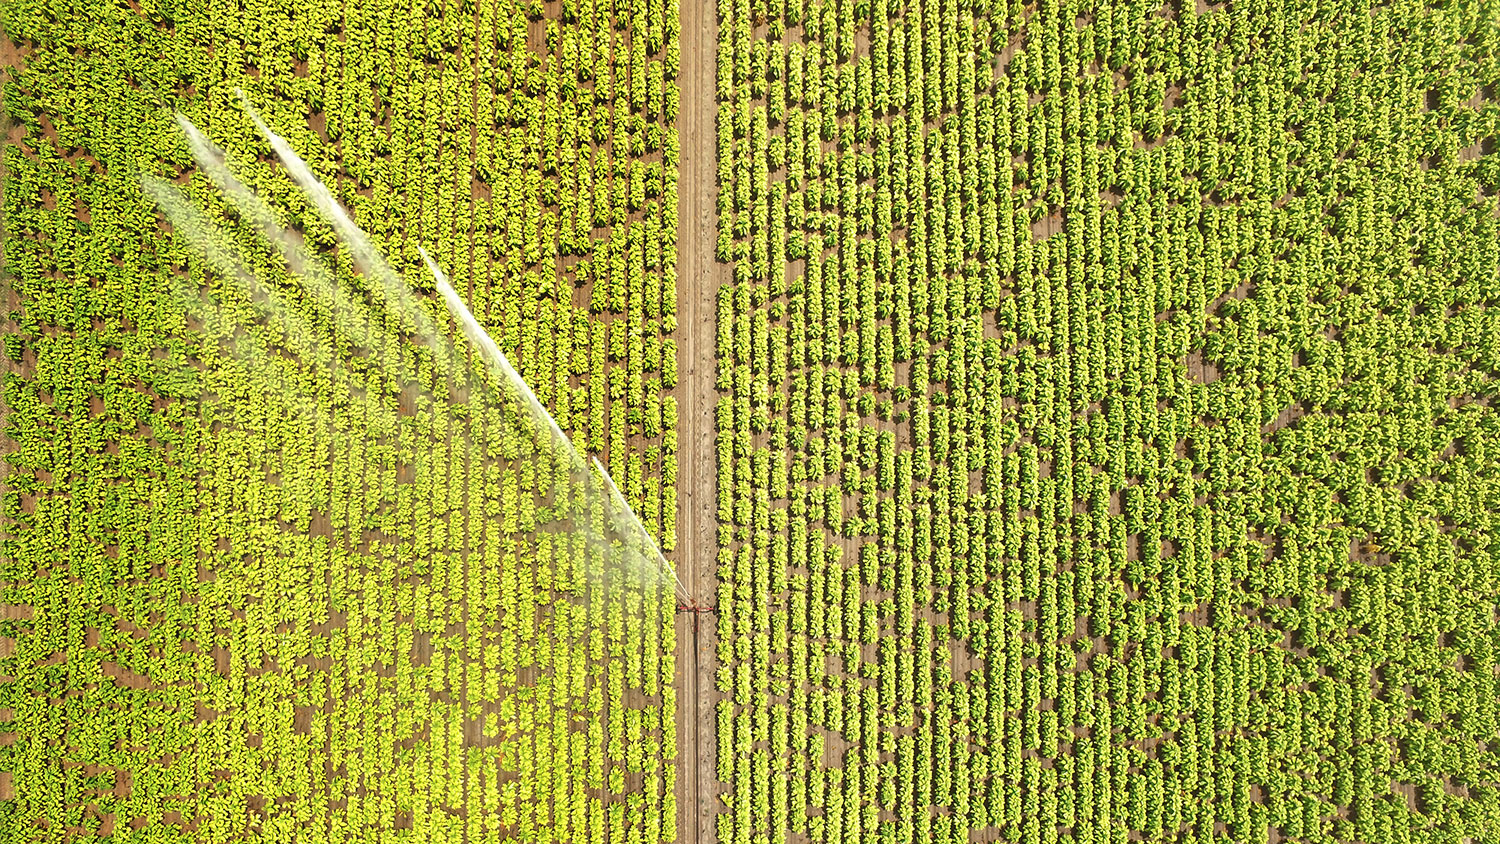 Field irrigation from a drone